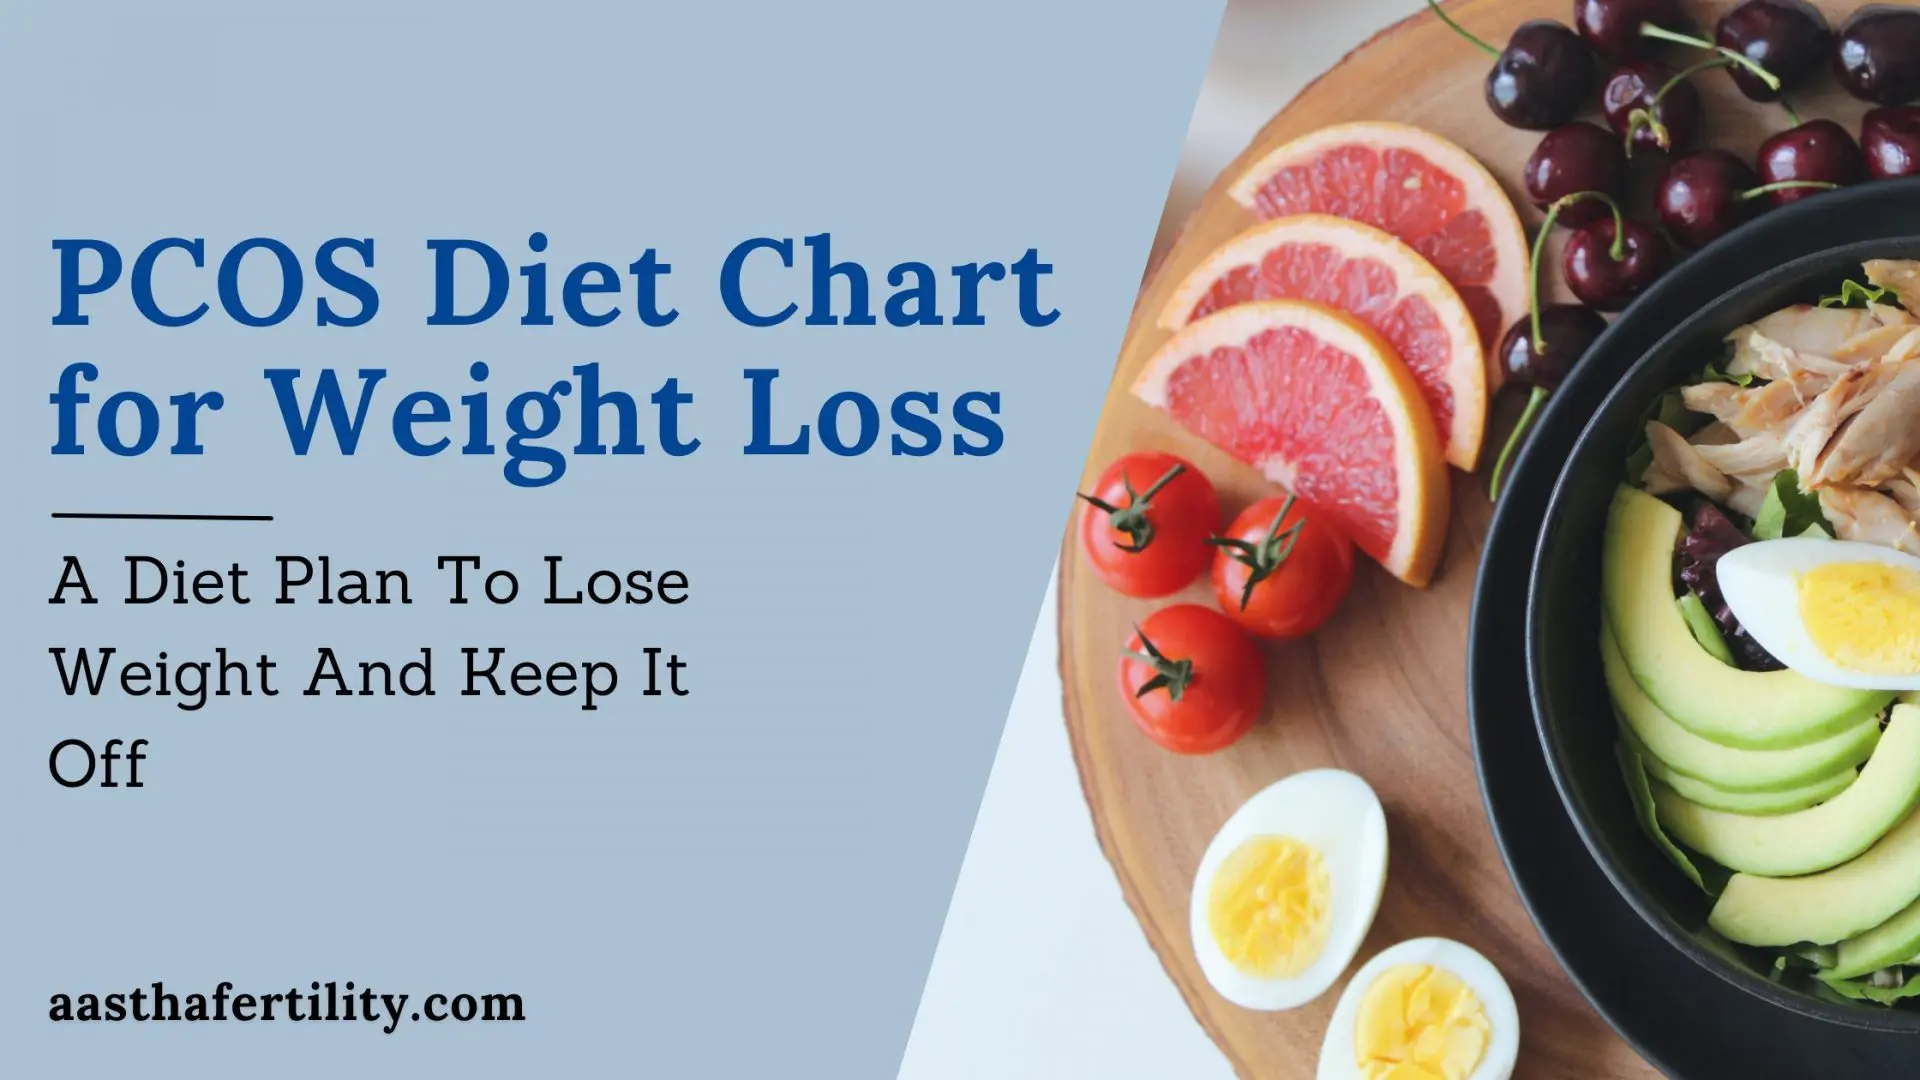 PCOS/PCOD Diet Chart for Weight Loss: Diet Plan To Lose Weight